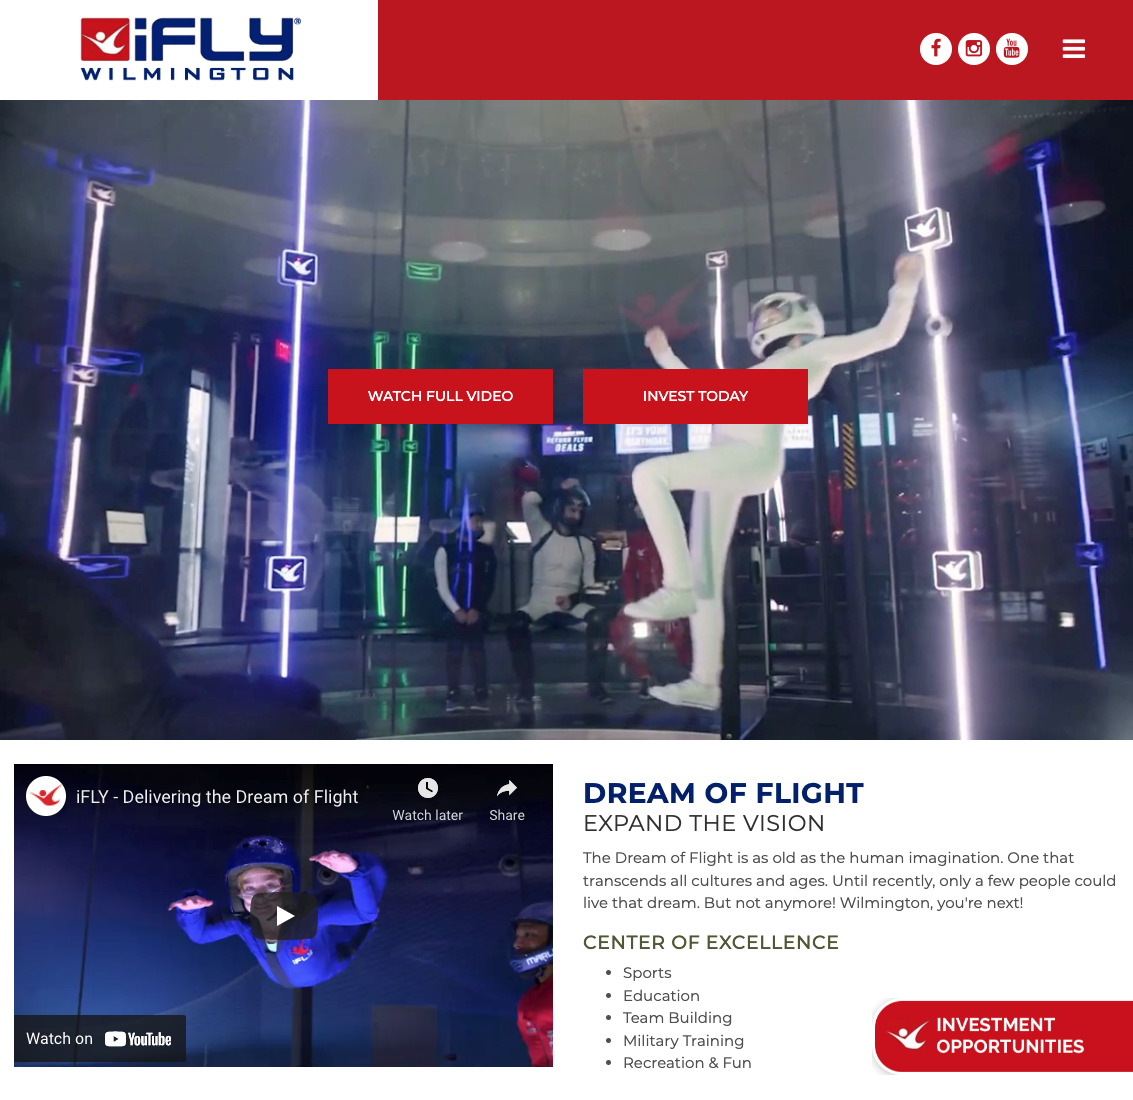 New iFLY Wilmington Investment Website